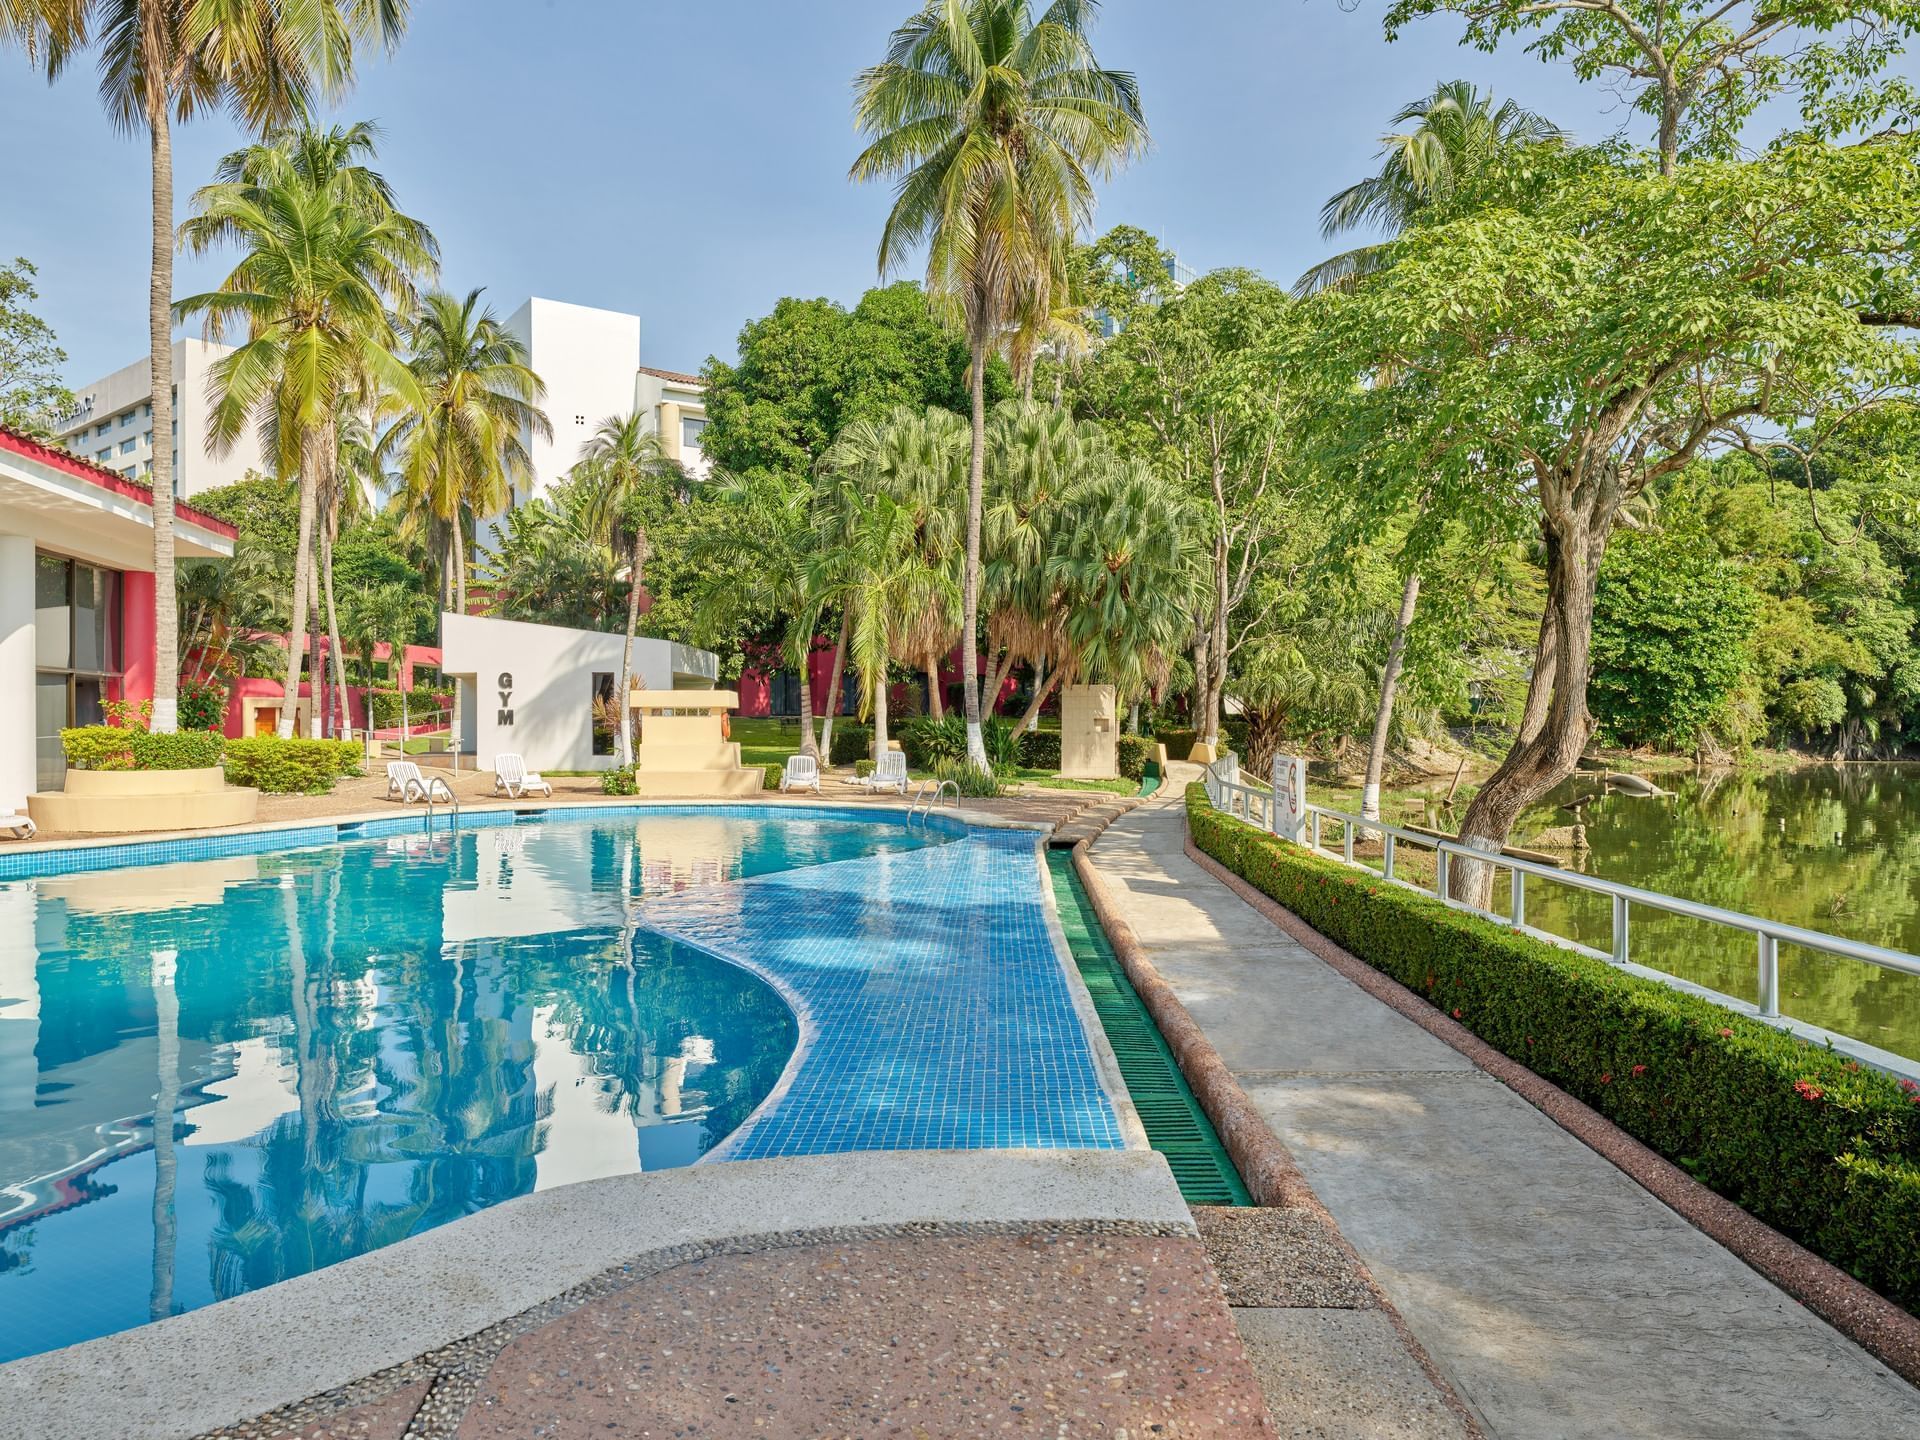 Outdoor swimming pool with a garden view at Fiesta Inn Hotels